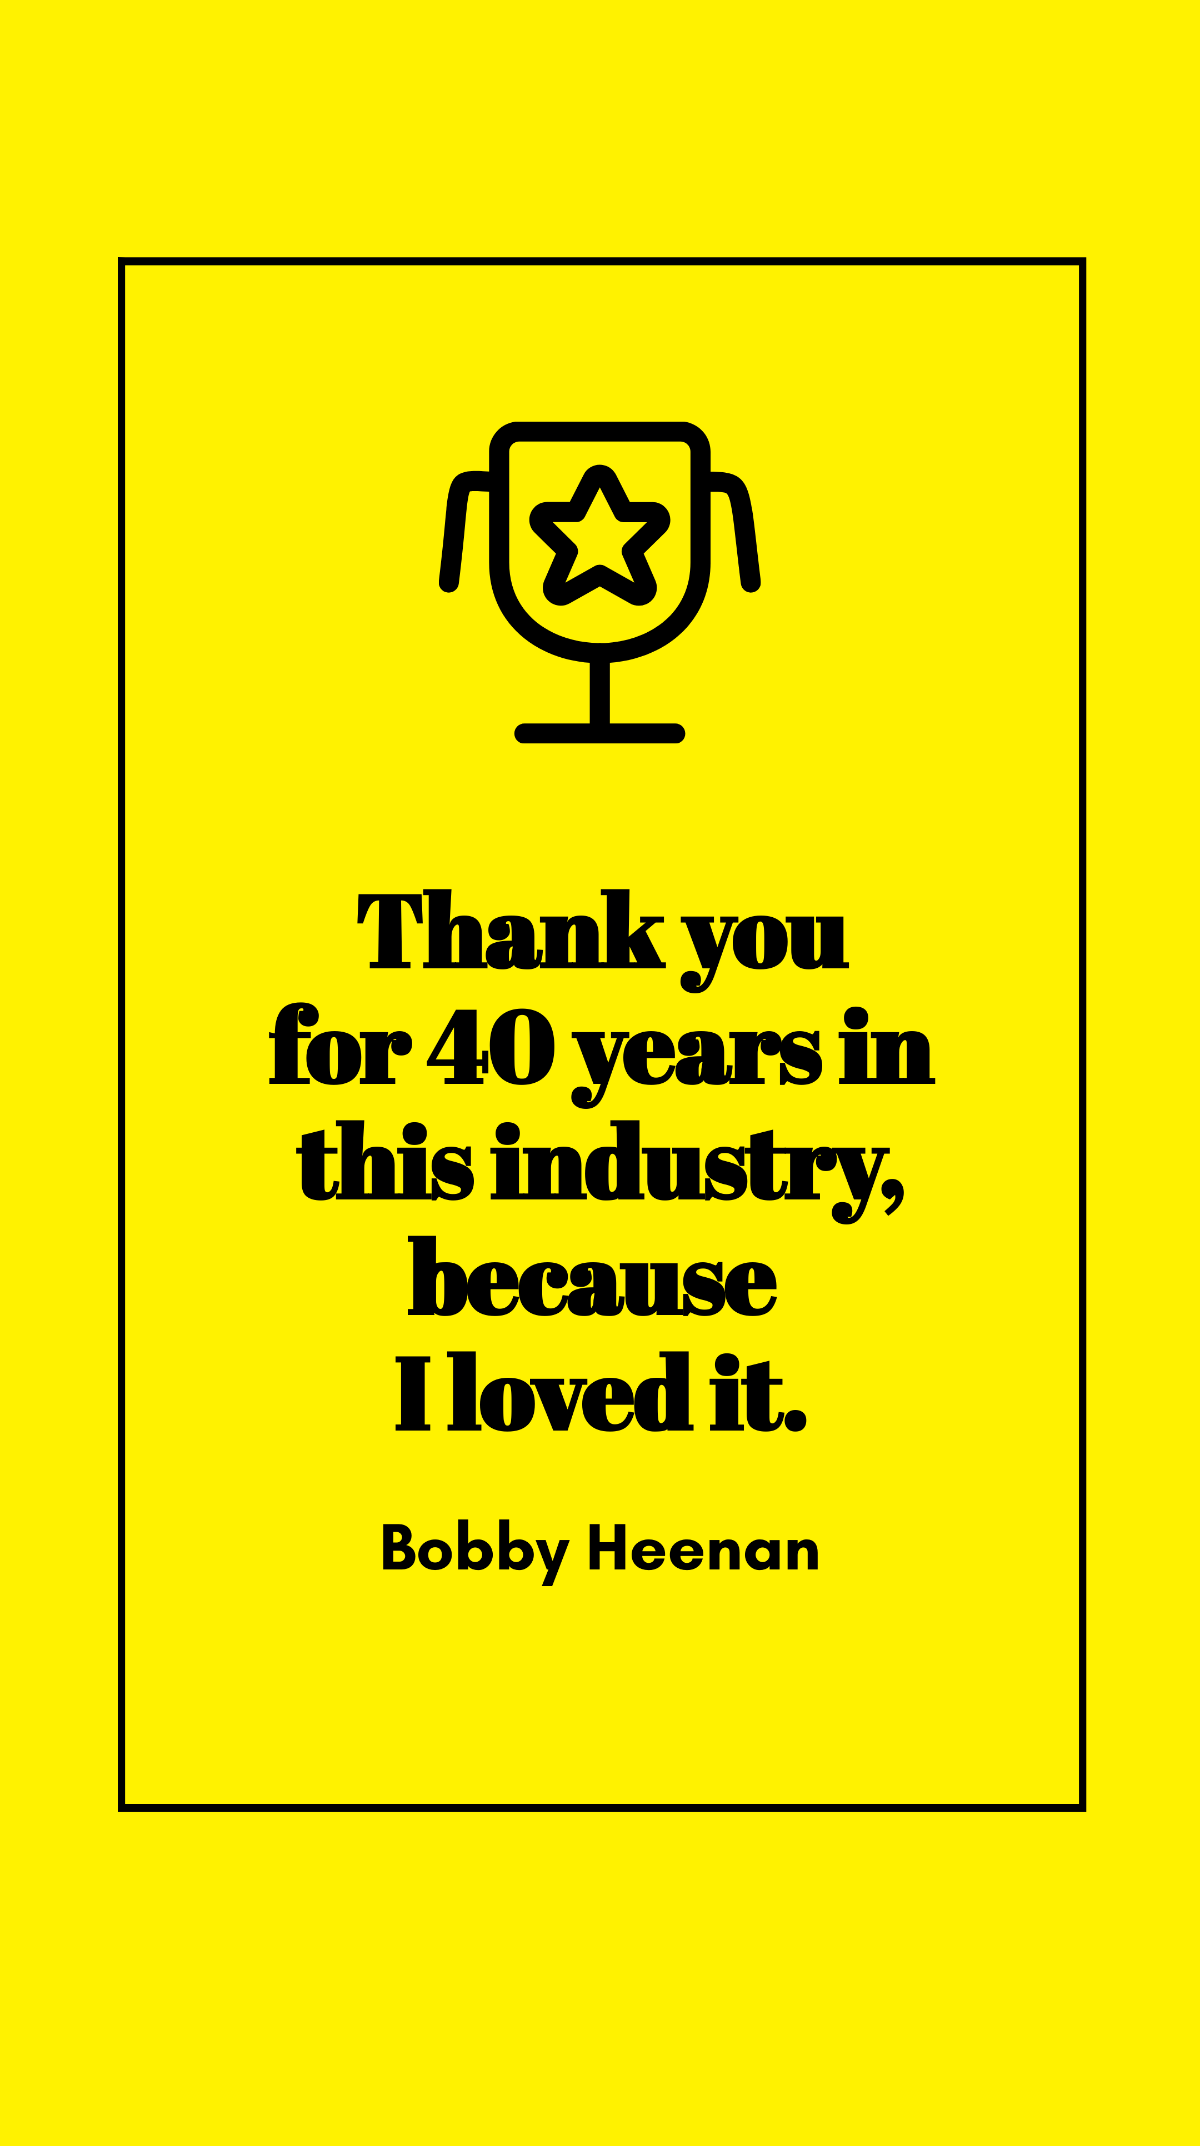 Free Bobby Heenan - Thank you for 40 years in this industry, because I loved it. Template